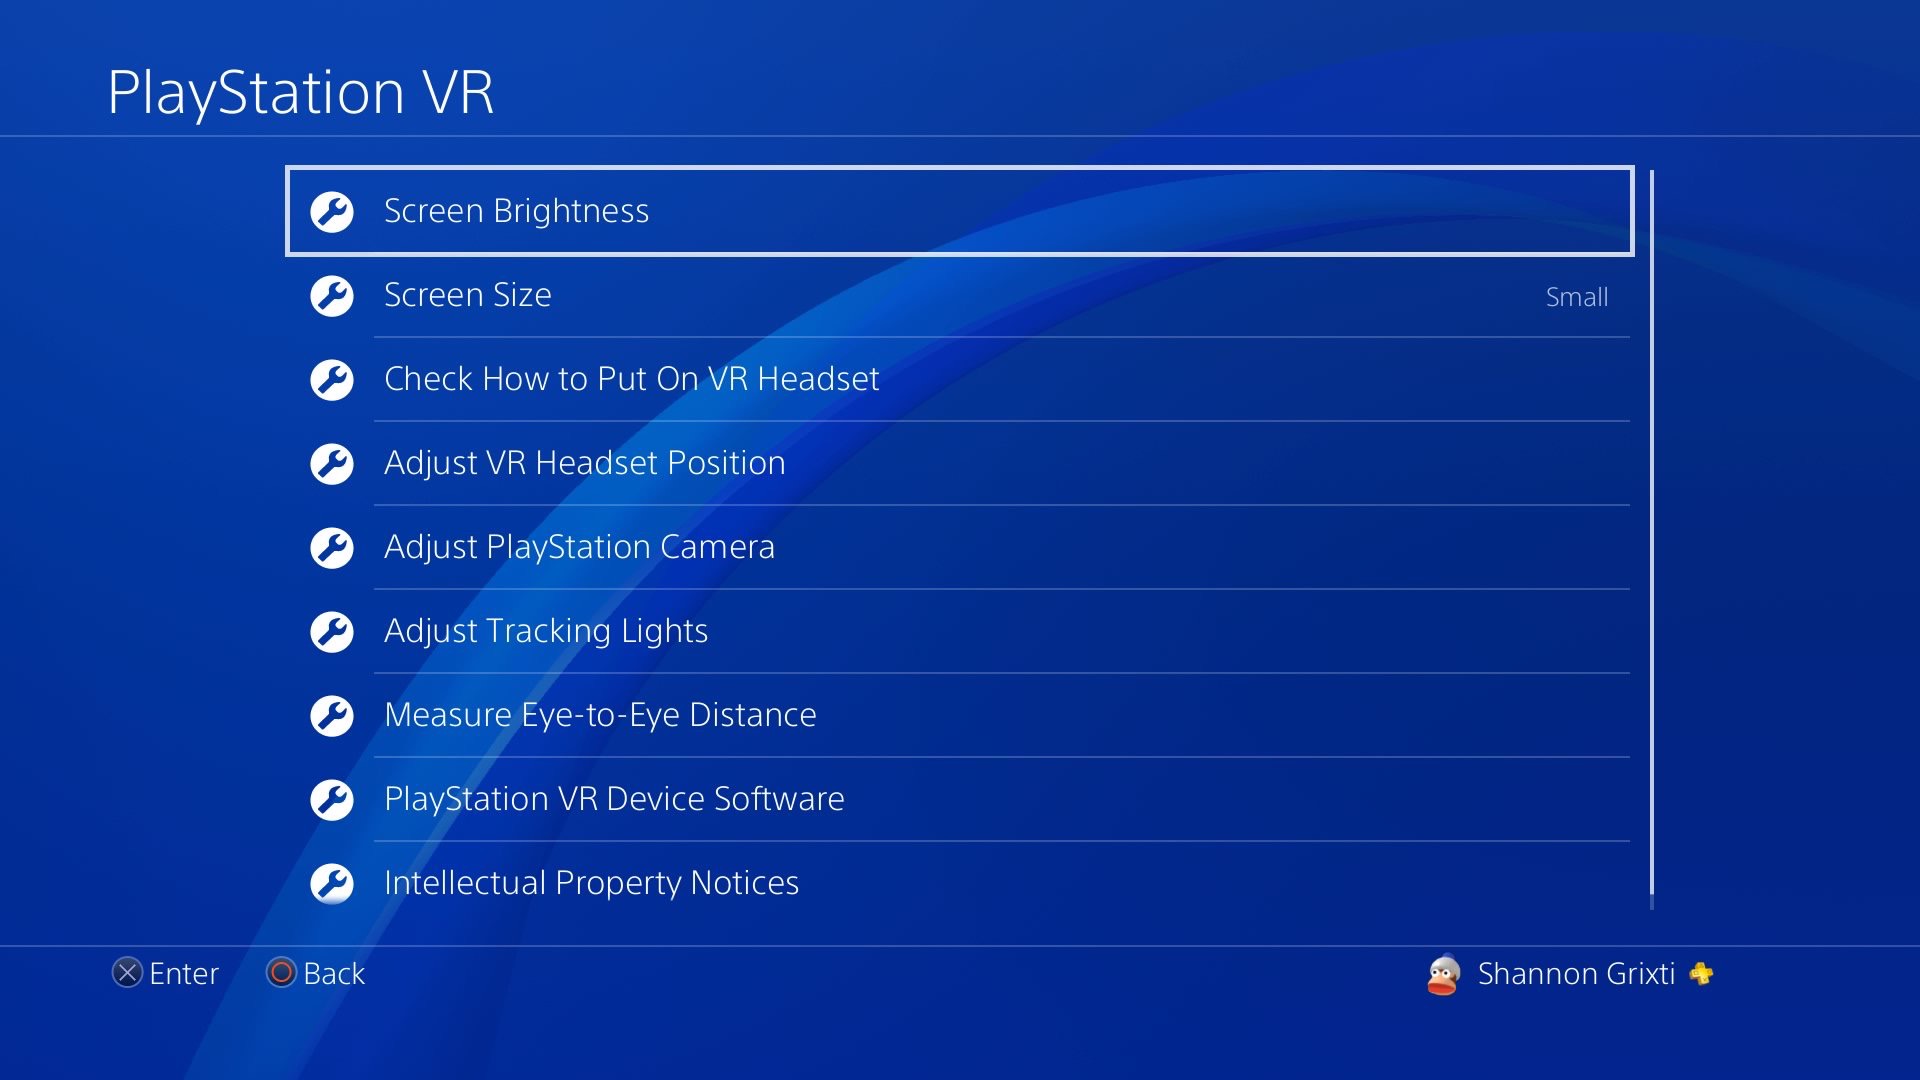 The Extensive List Of PlayStation VR Settings